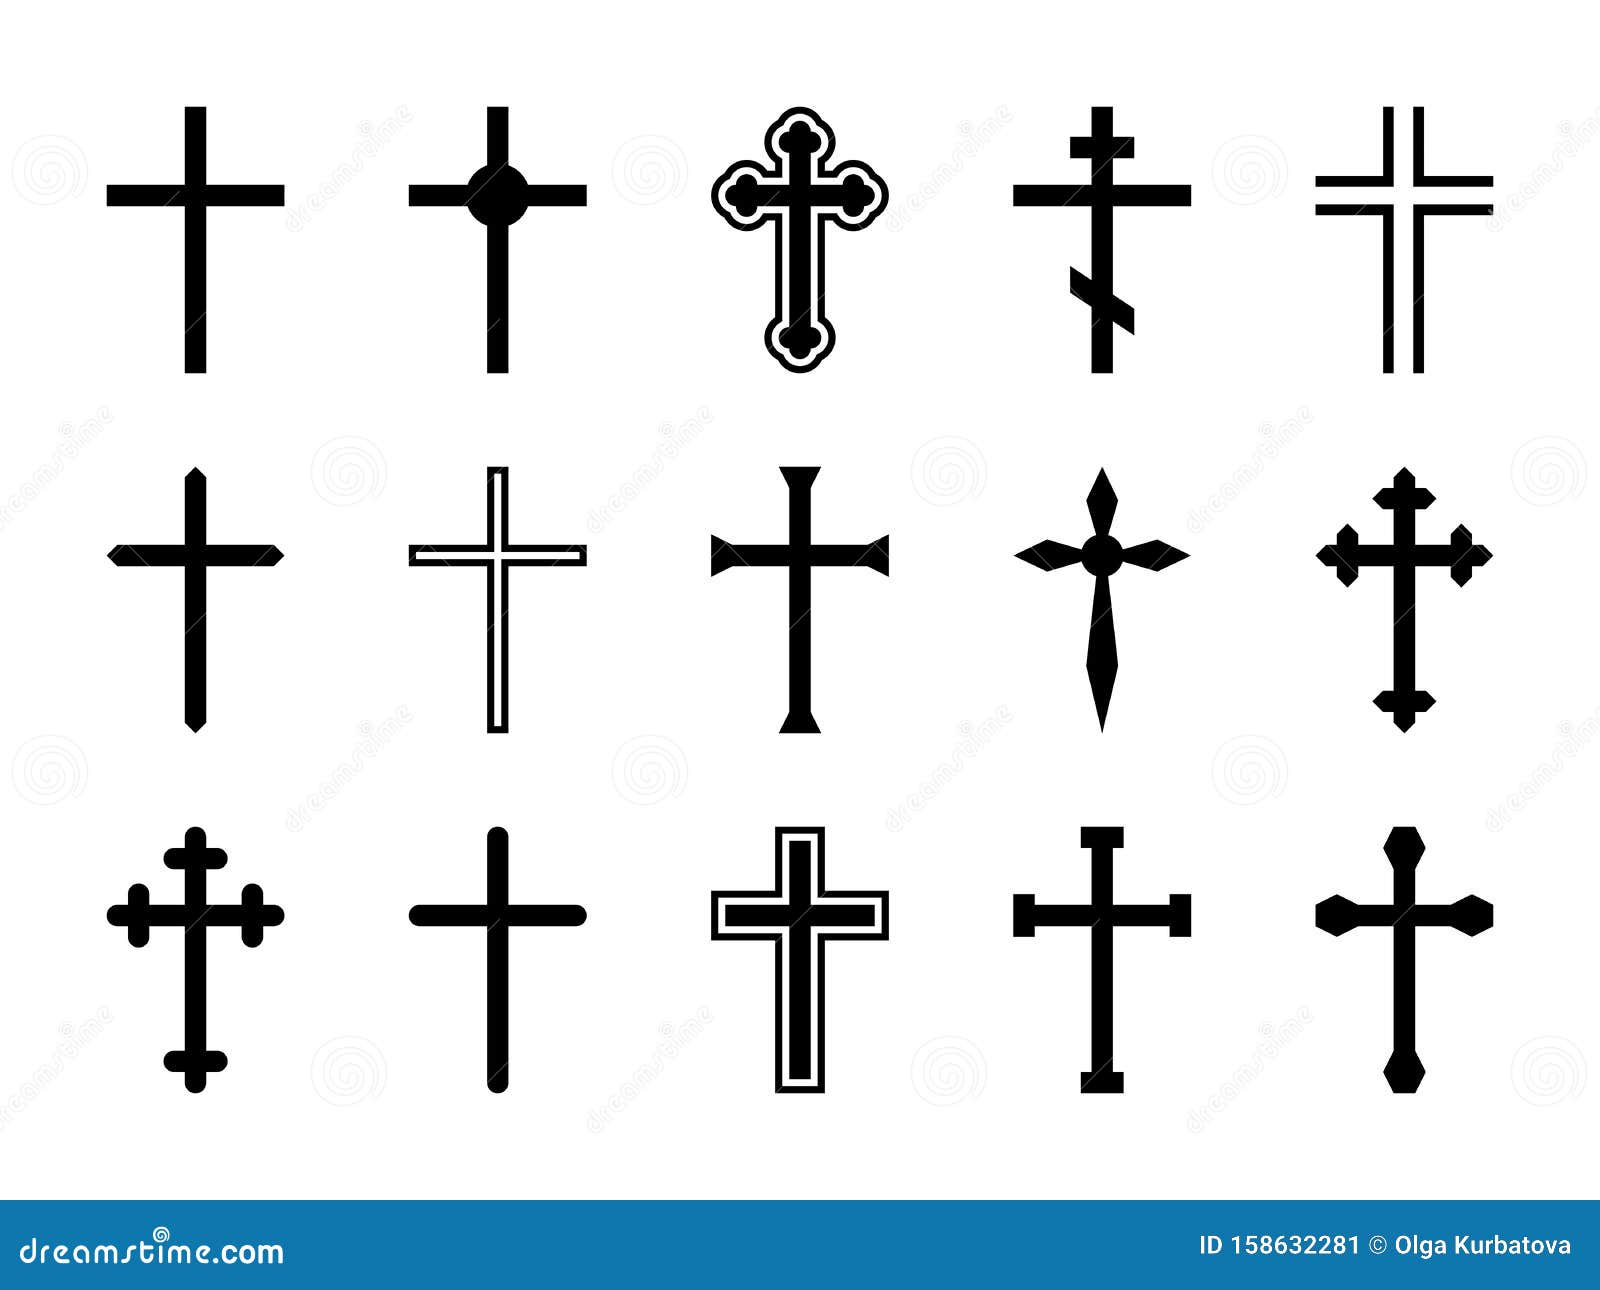 christian cross. jesus christ crucifix, different s of orthodox and catalytic crosses religious silhouette signs